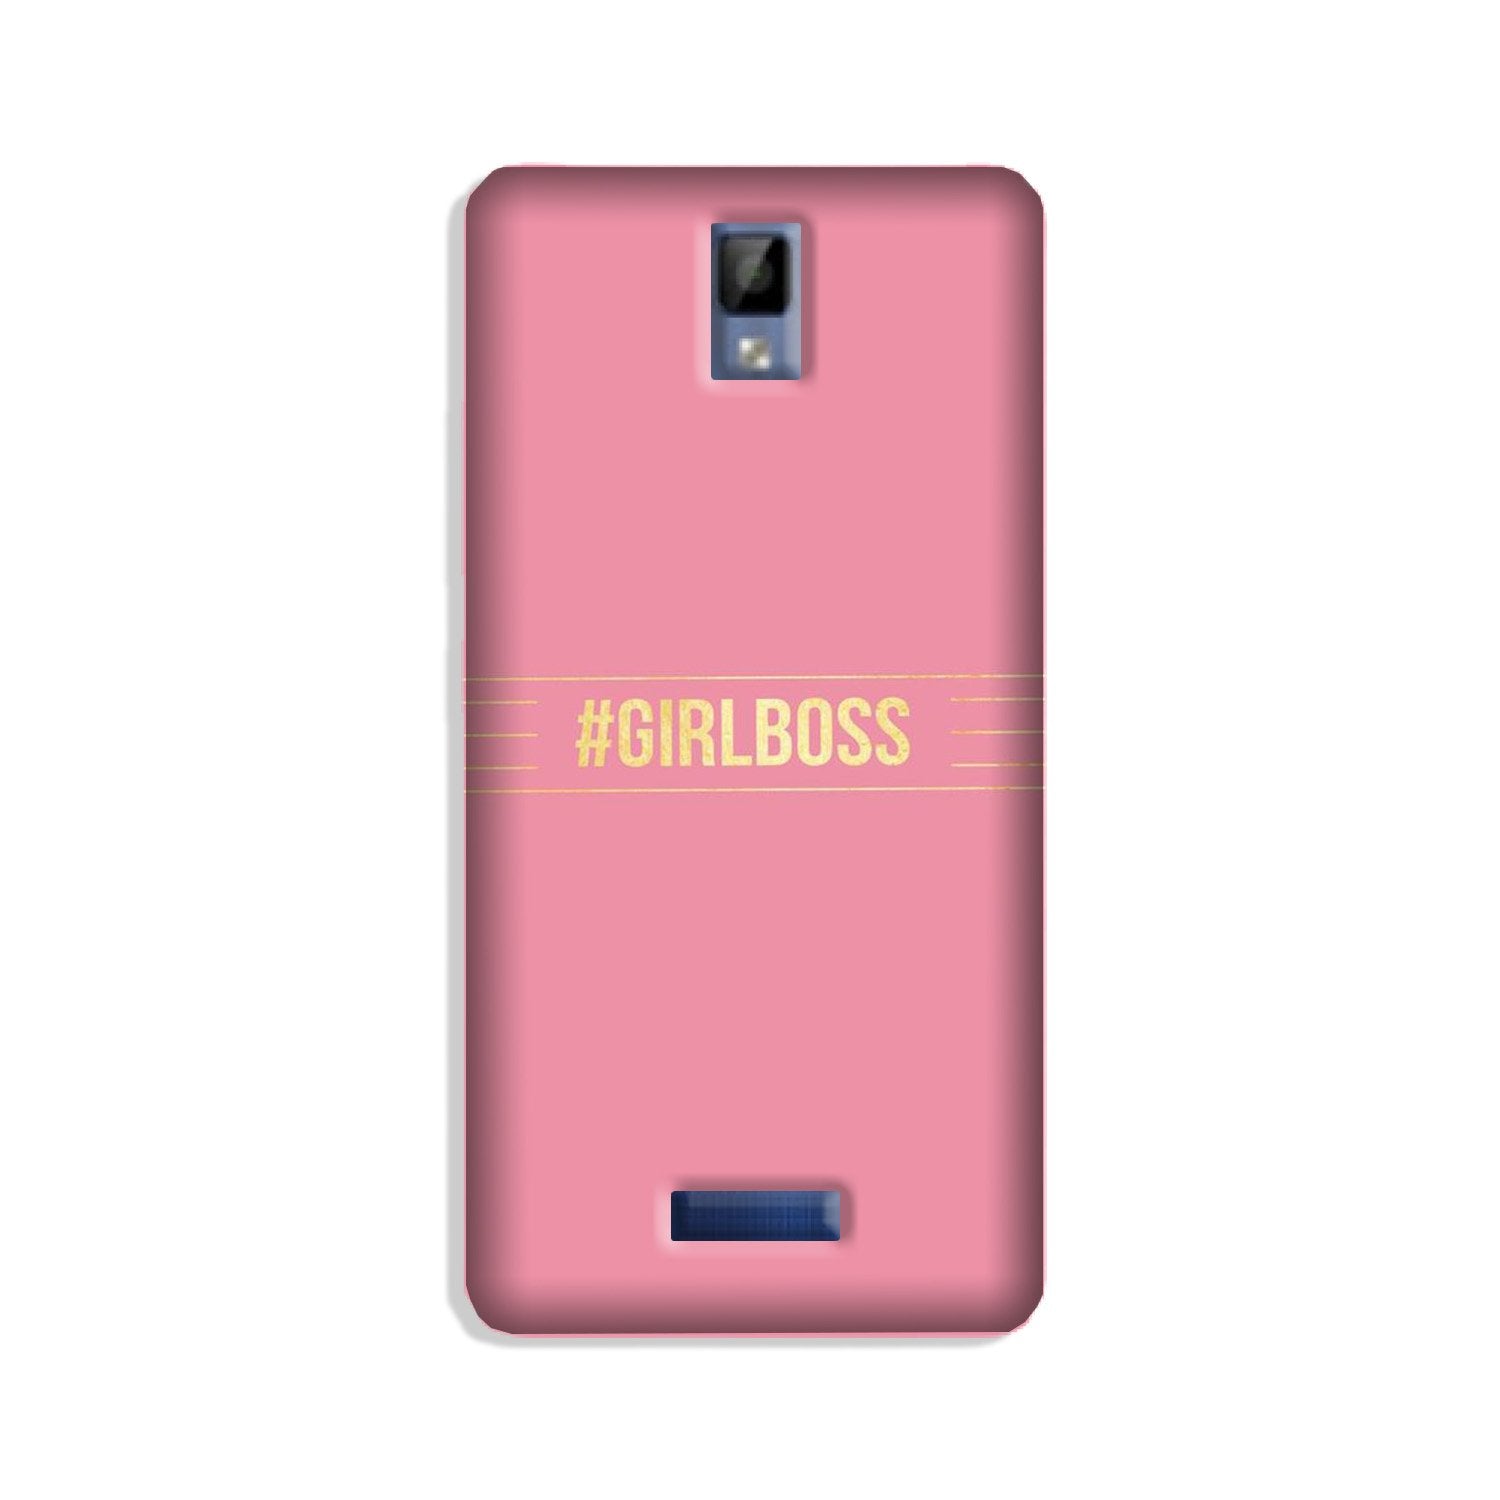 Girl Boss Pink Case for Gionee P7 (Design No. 263)